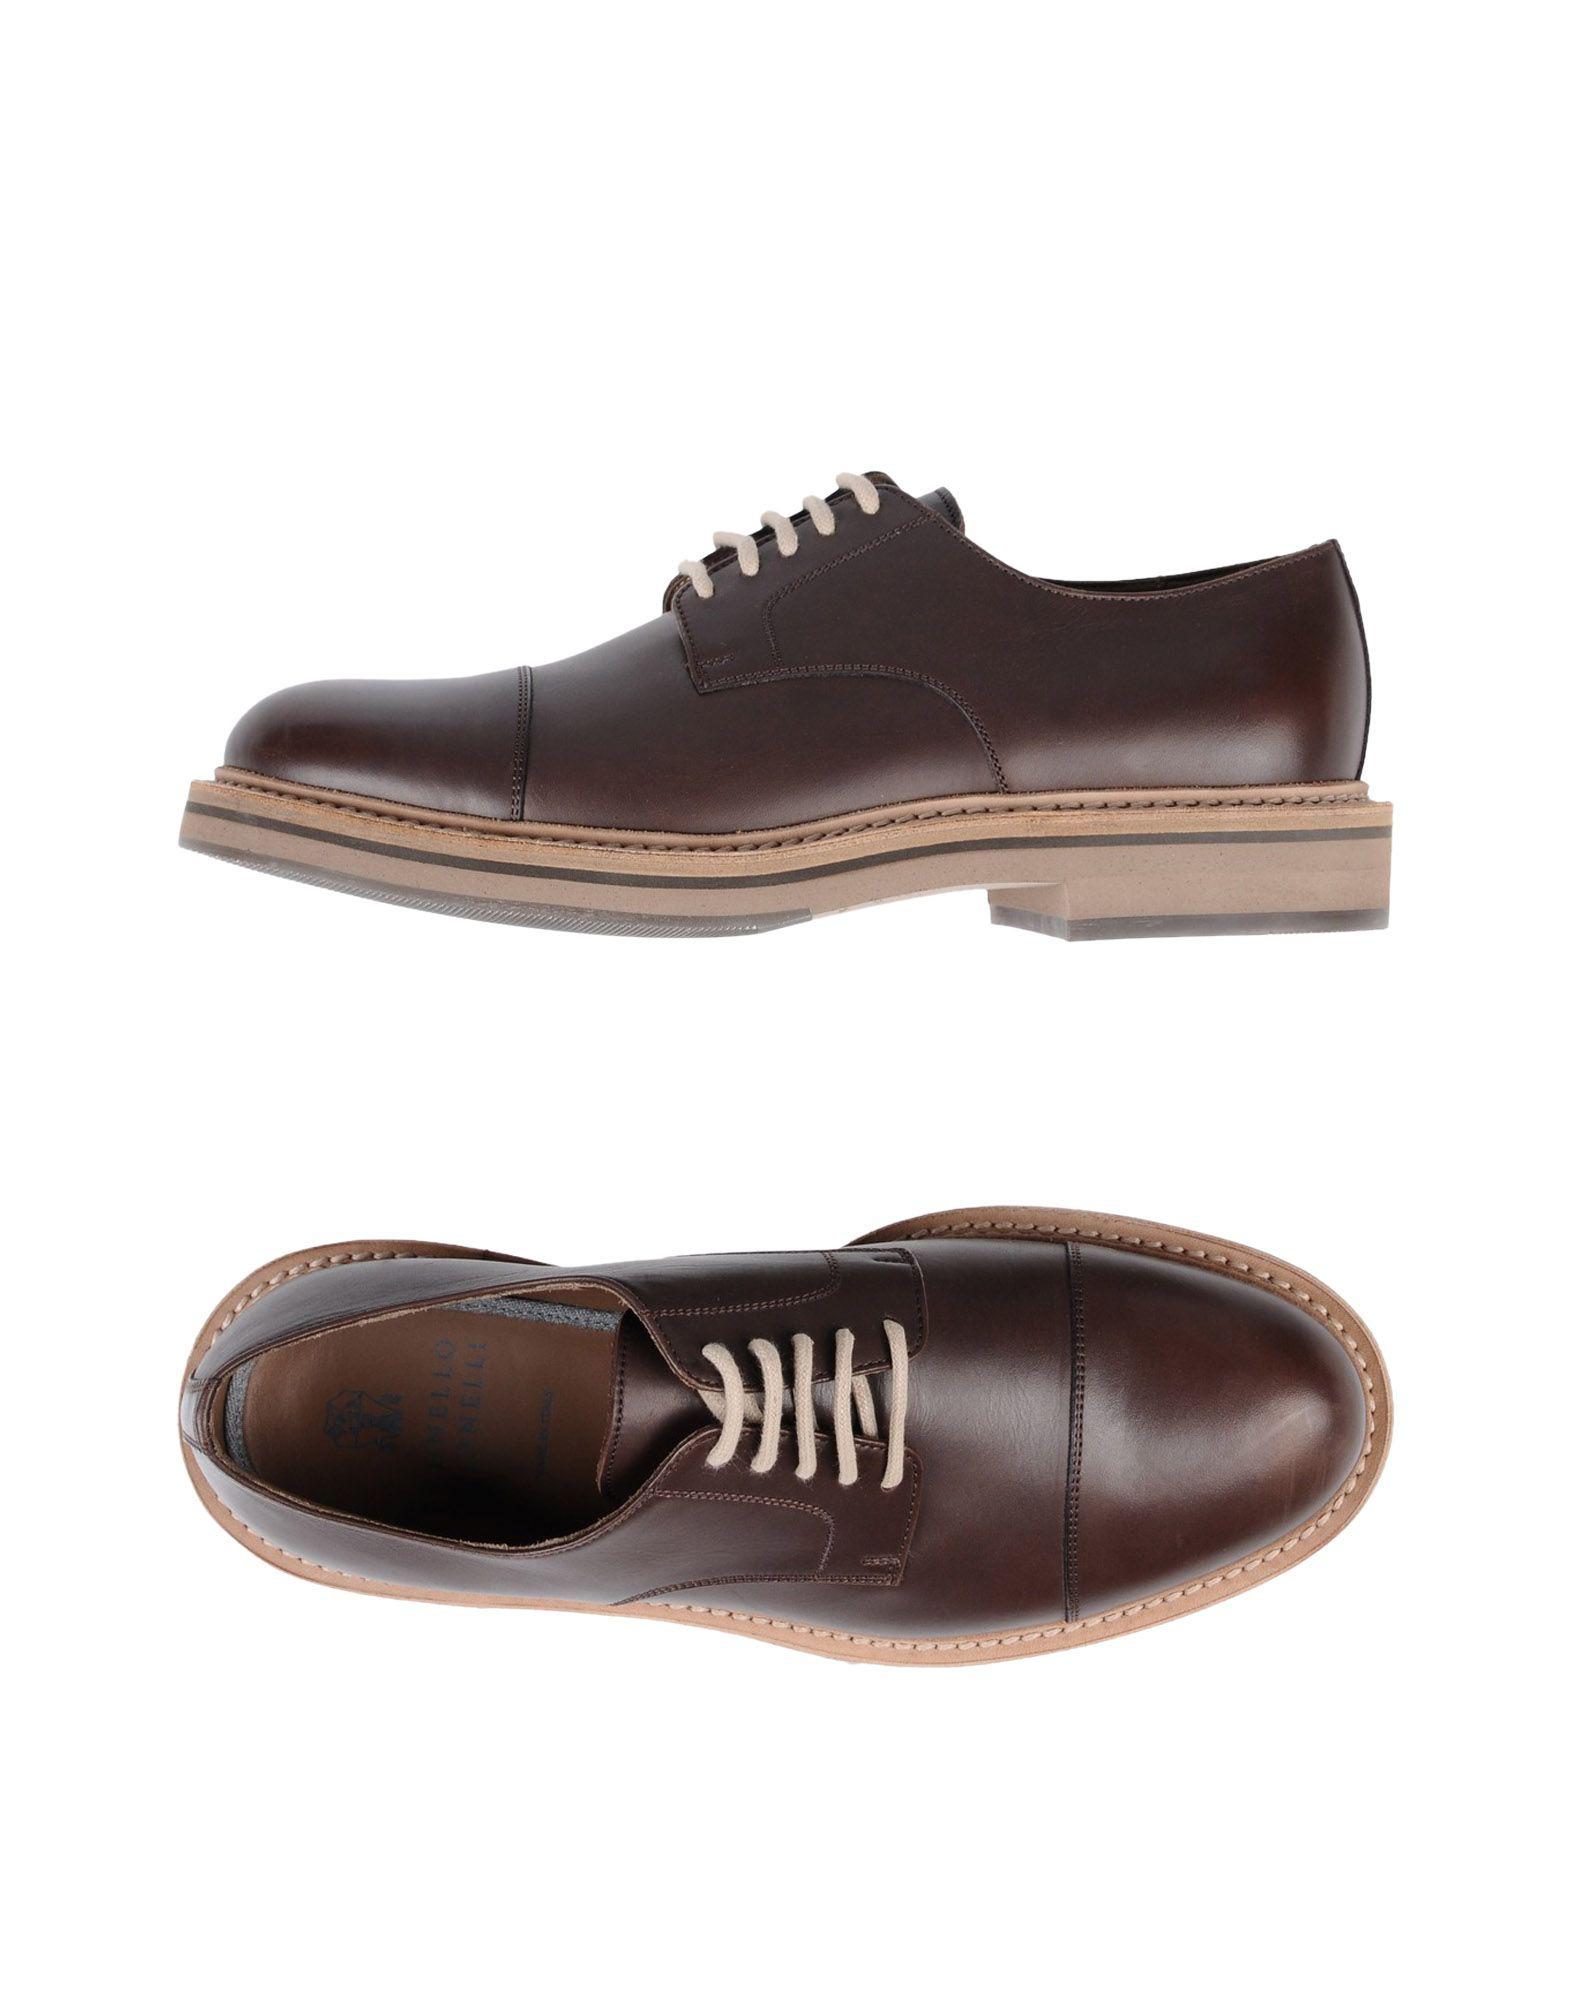 Brunello Cucinelli Lace-up Shoe in Brown for Men - Lyst